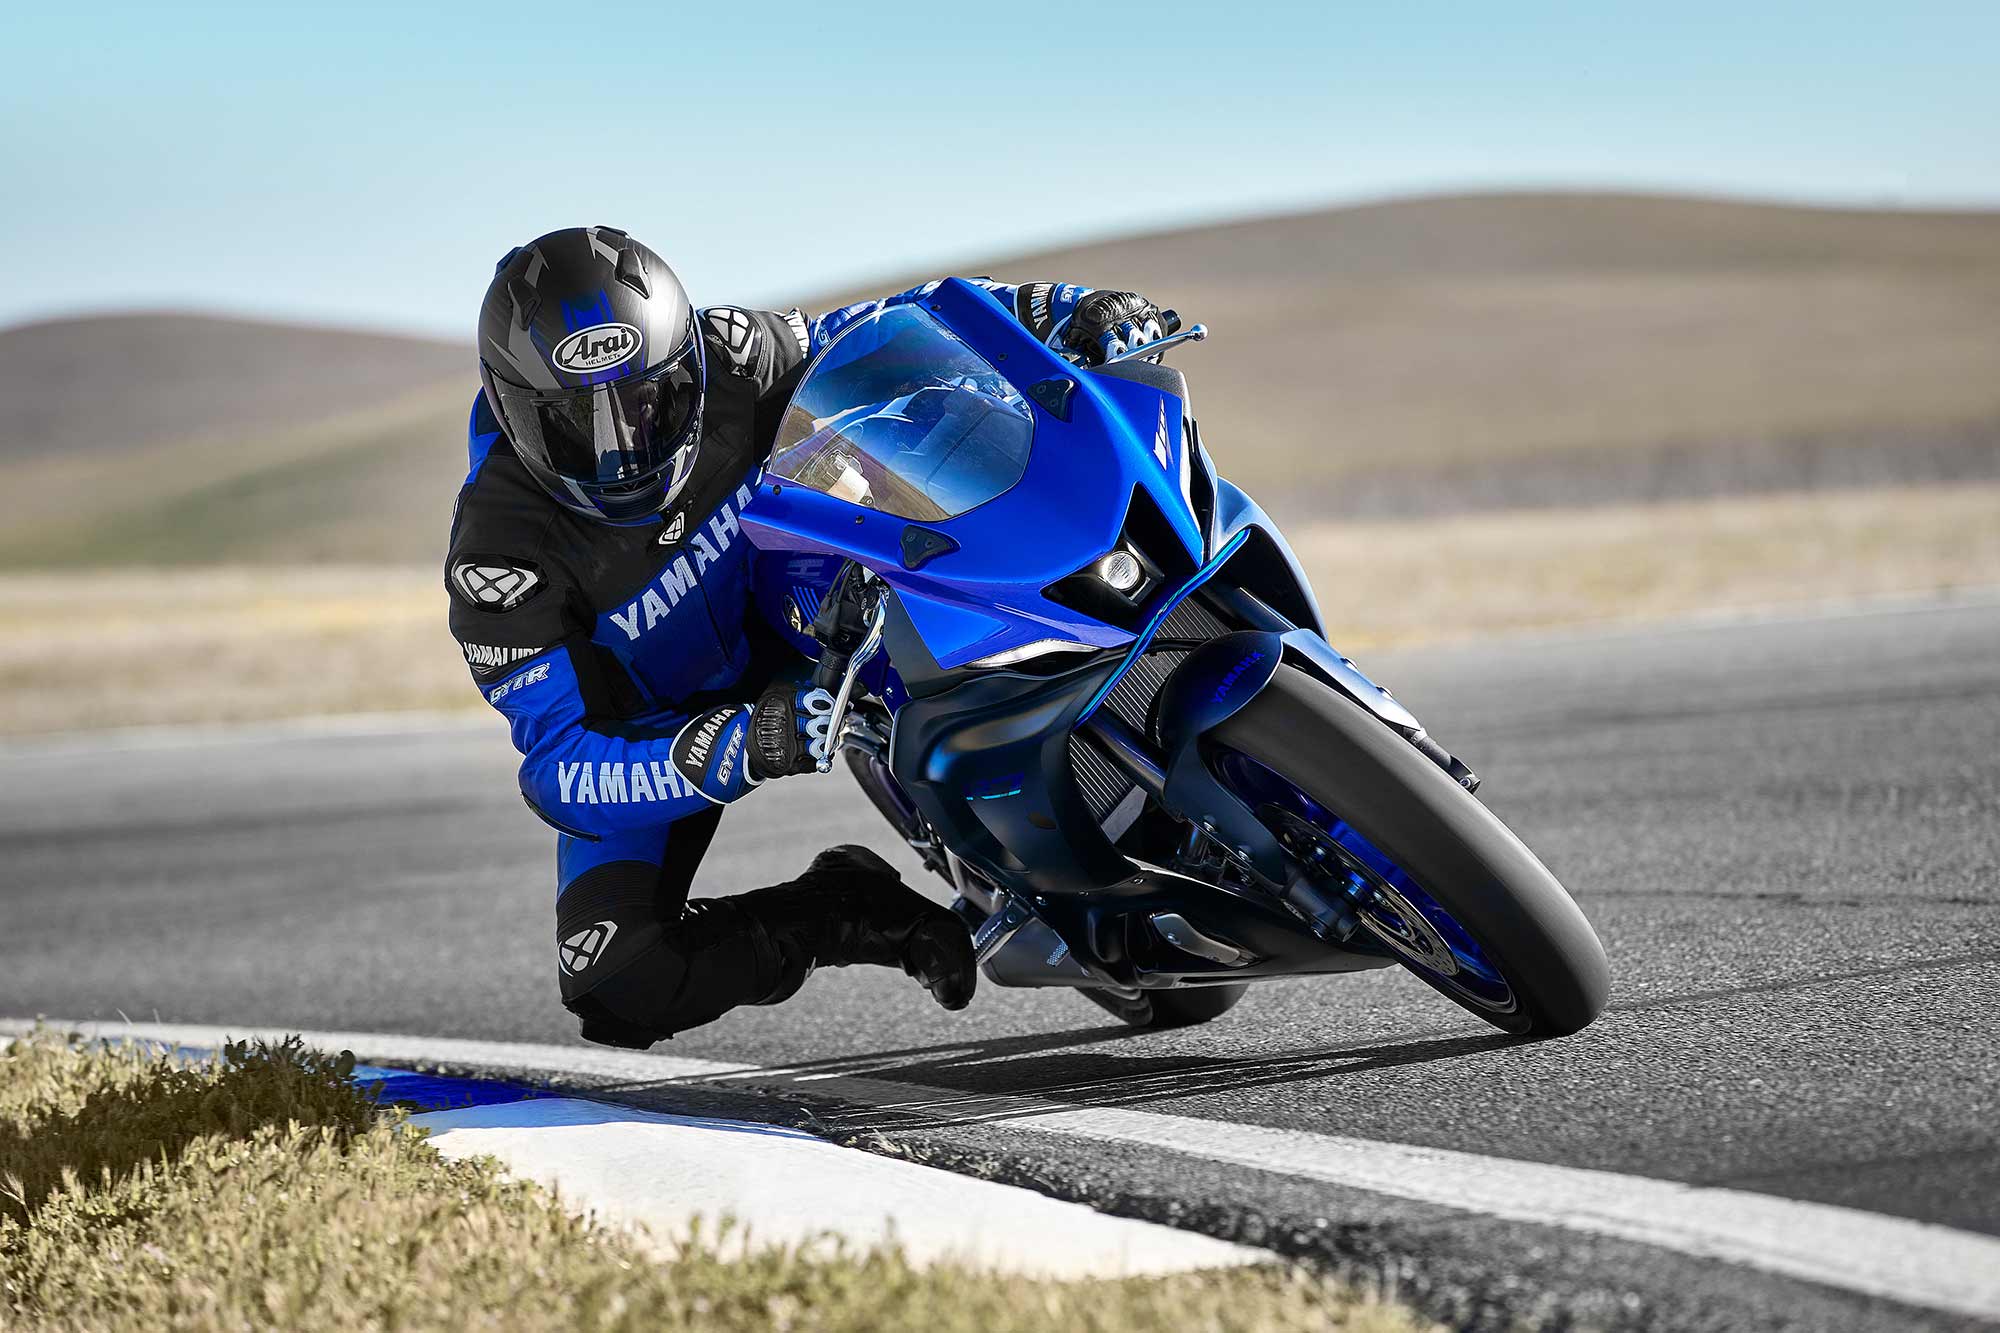 2022 Yamaha YZF-R7 Buyer's Guide: Specs, Photos, Price